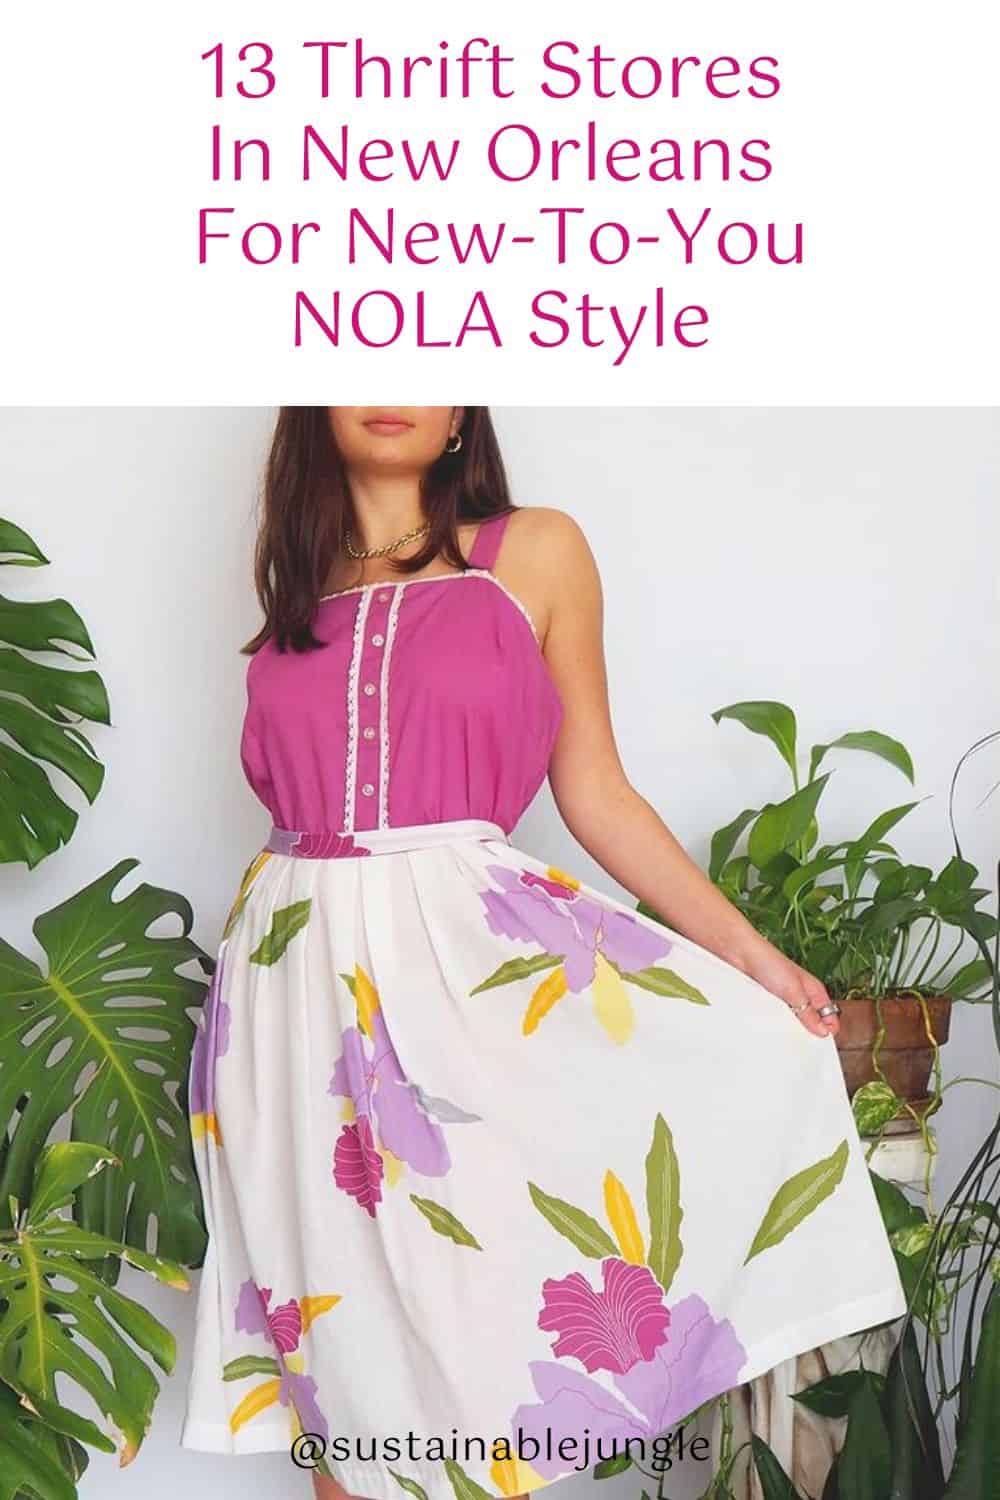 13 Thrift Stores In New Orleans For New-To-You NOLA Style Image by Blue Dream #thriftstoresneworleans #thriftstoresinneworleans #bestneworleansthriftstores #bestthriftstoresneworleans #consignmentstoresneworleans #sustainablejungle